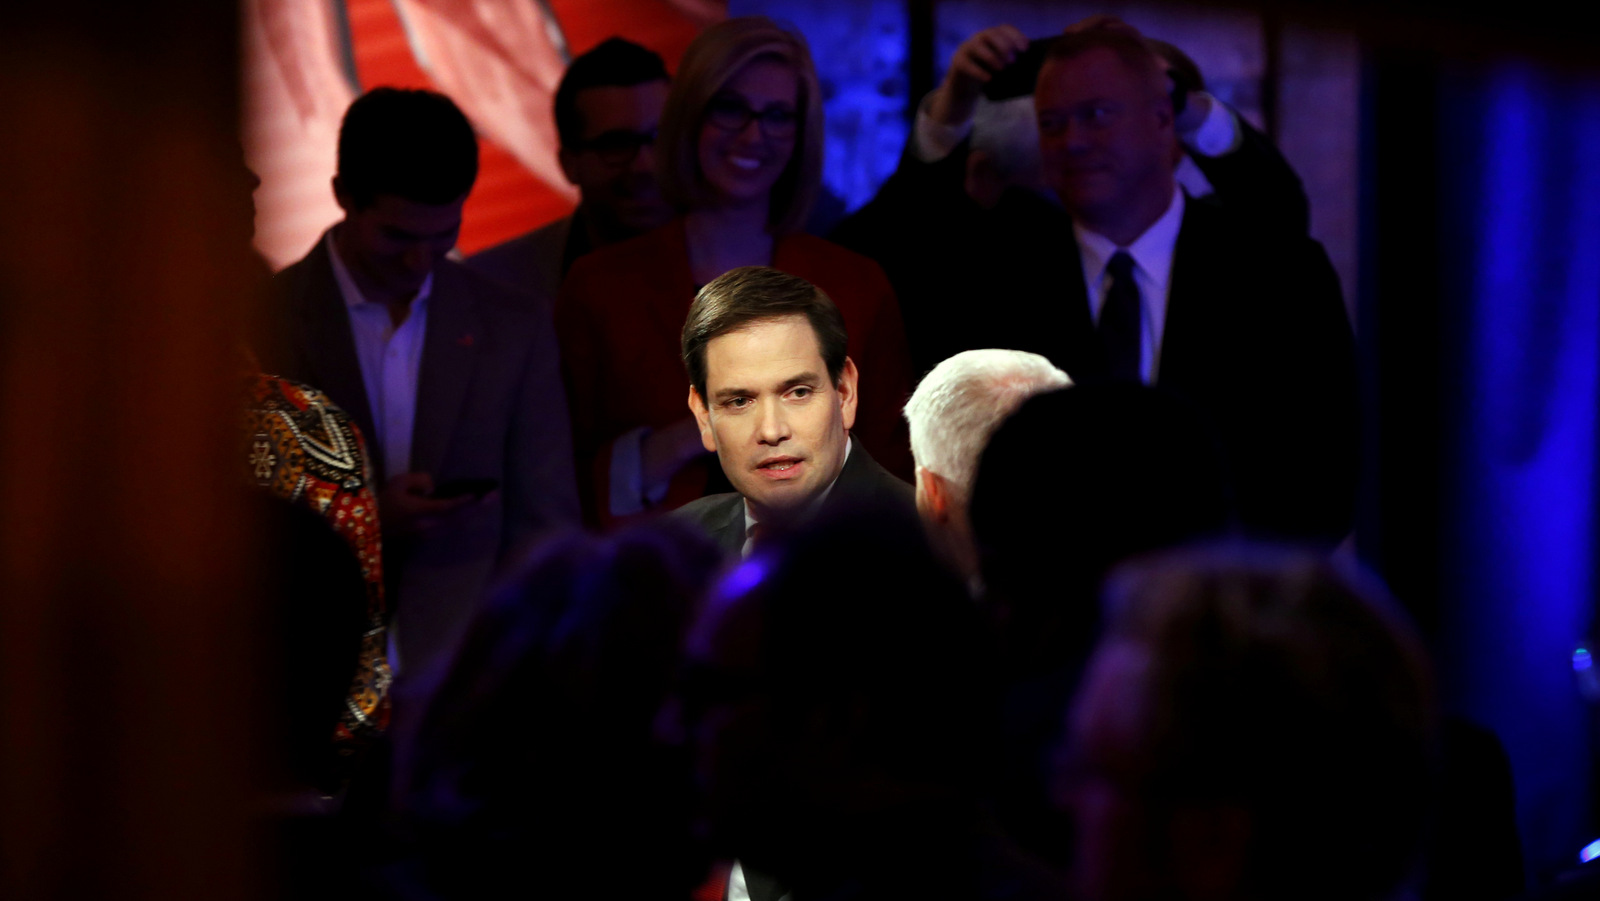 Republican presidential candidate, Sen. Marco Rubio, R-Fla., talks with Anderson Cooper during a commercial break at a CNN town hall event, Tuesday, Feb. 16, 2016, in Greenville, S.C. (AP Photo/Paul Sancya)